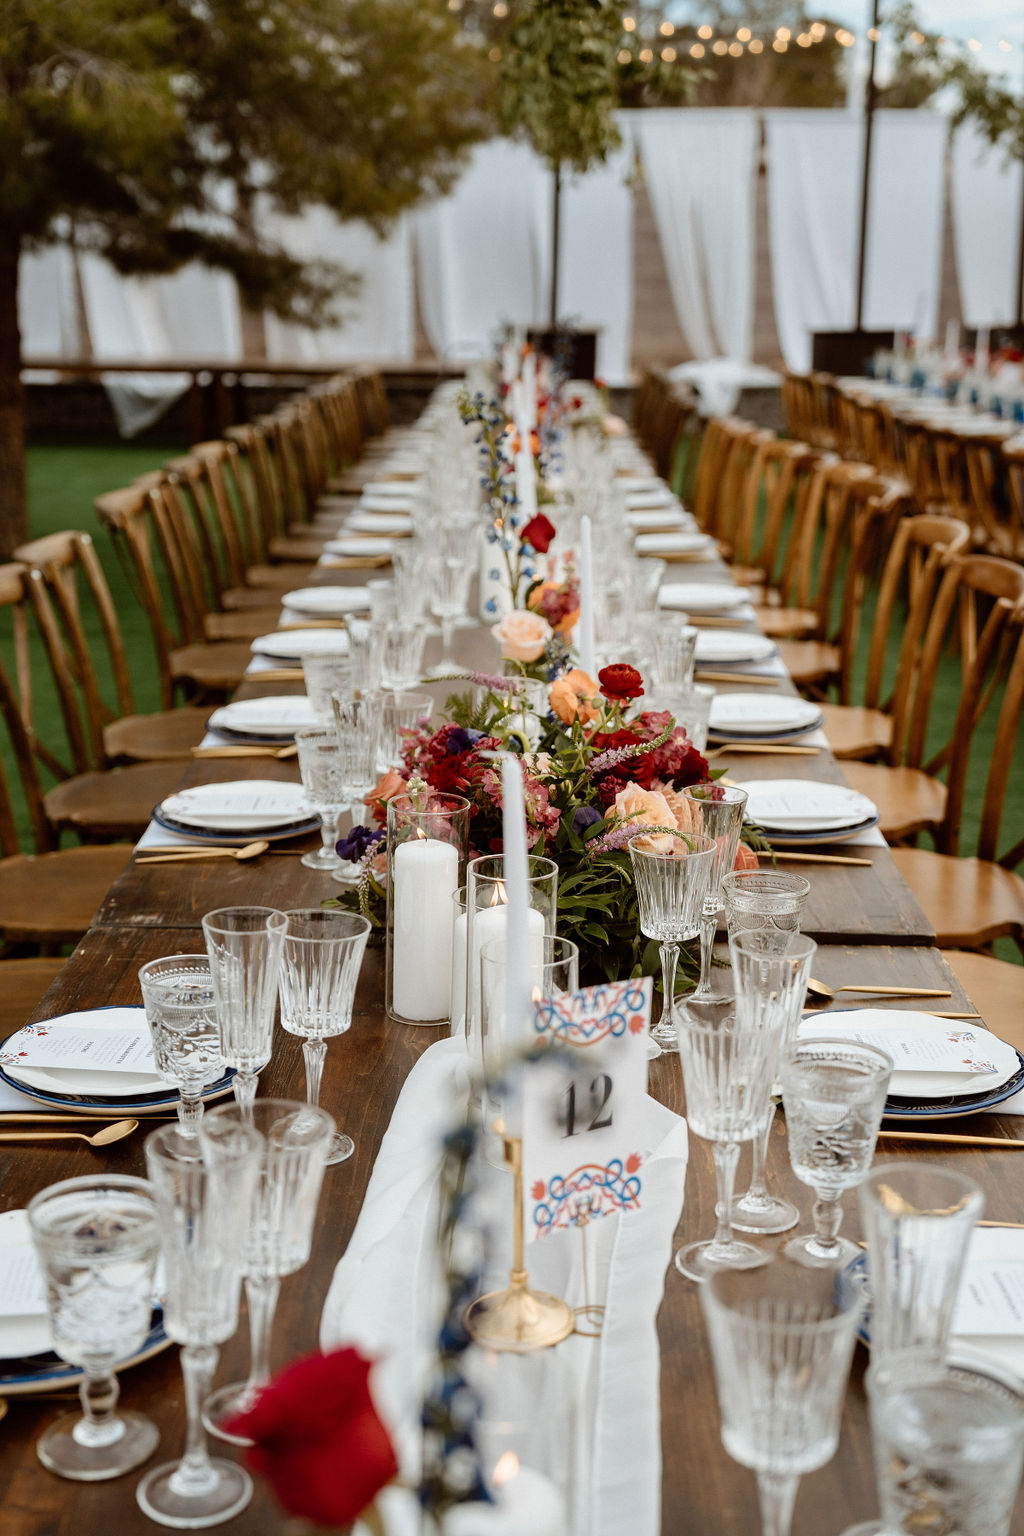 Elegantly set outdoor dining tables with wooden chairs, blue table runners, and decorative floral centerpieces for an hacienda themed wedding